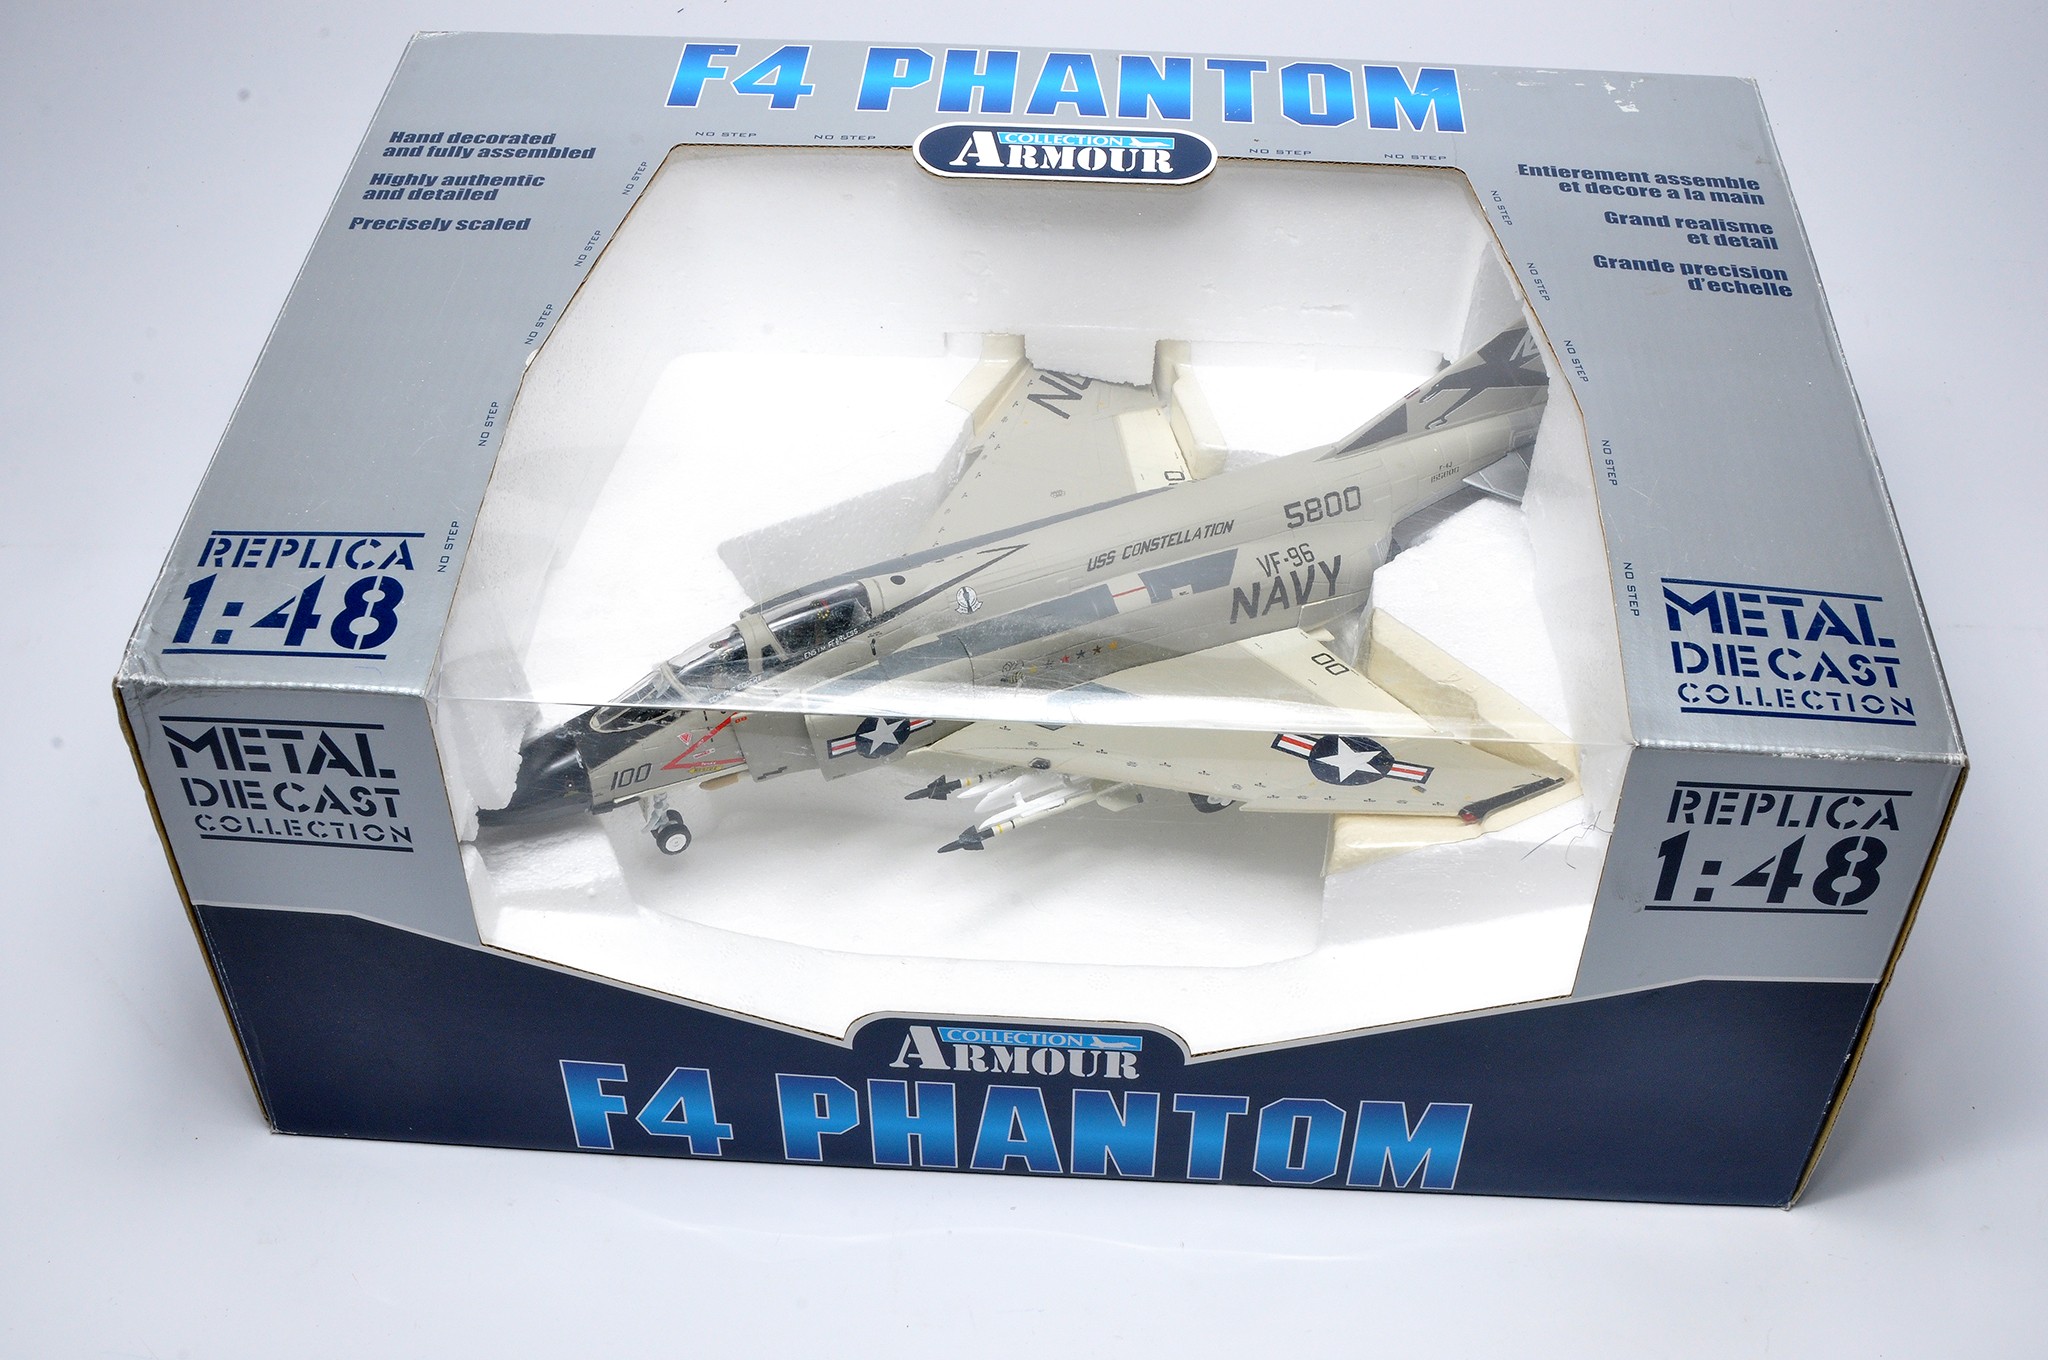 Franklin Mint 1/48 diecast model aircraft issue comprising No. B11B553 F4 Phantom. Looks to be